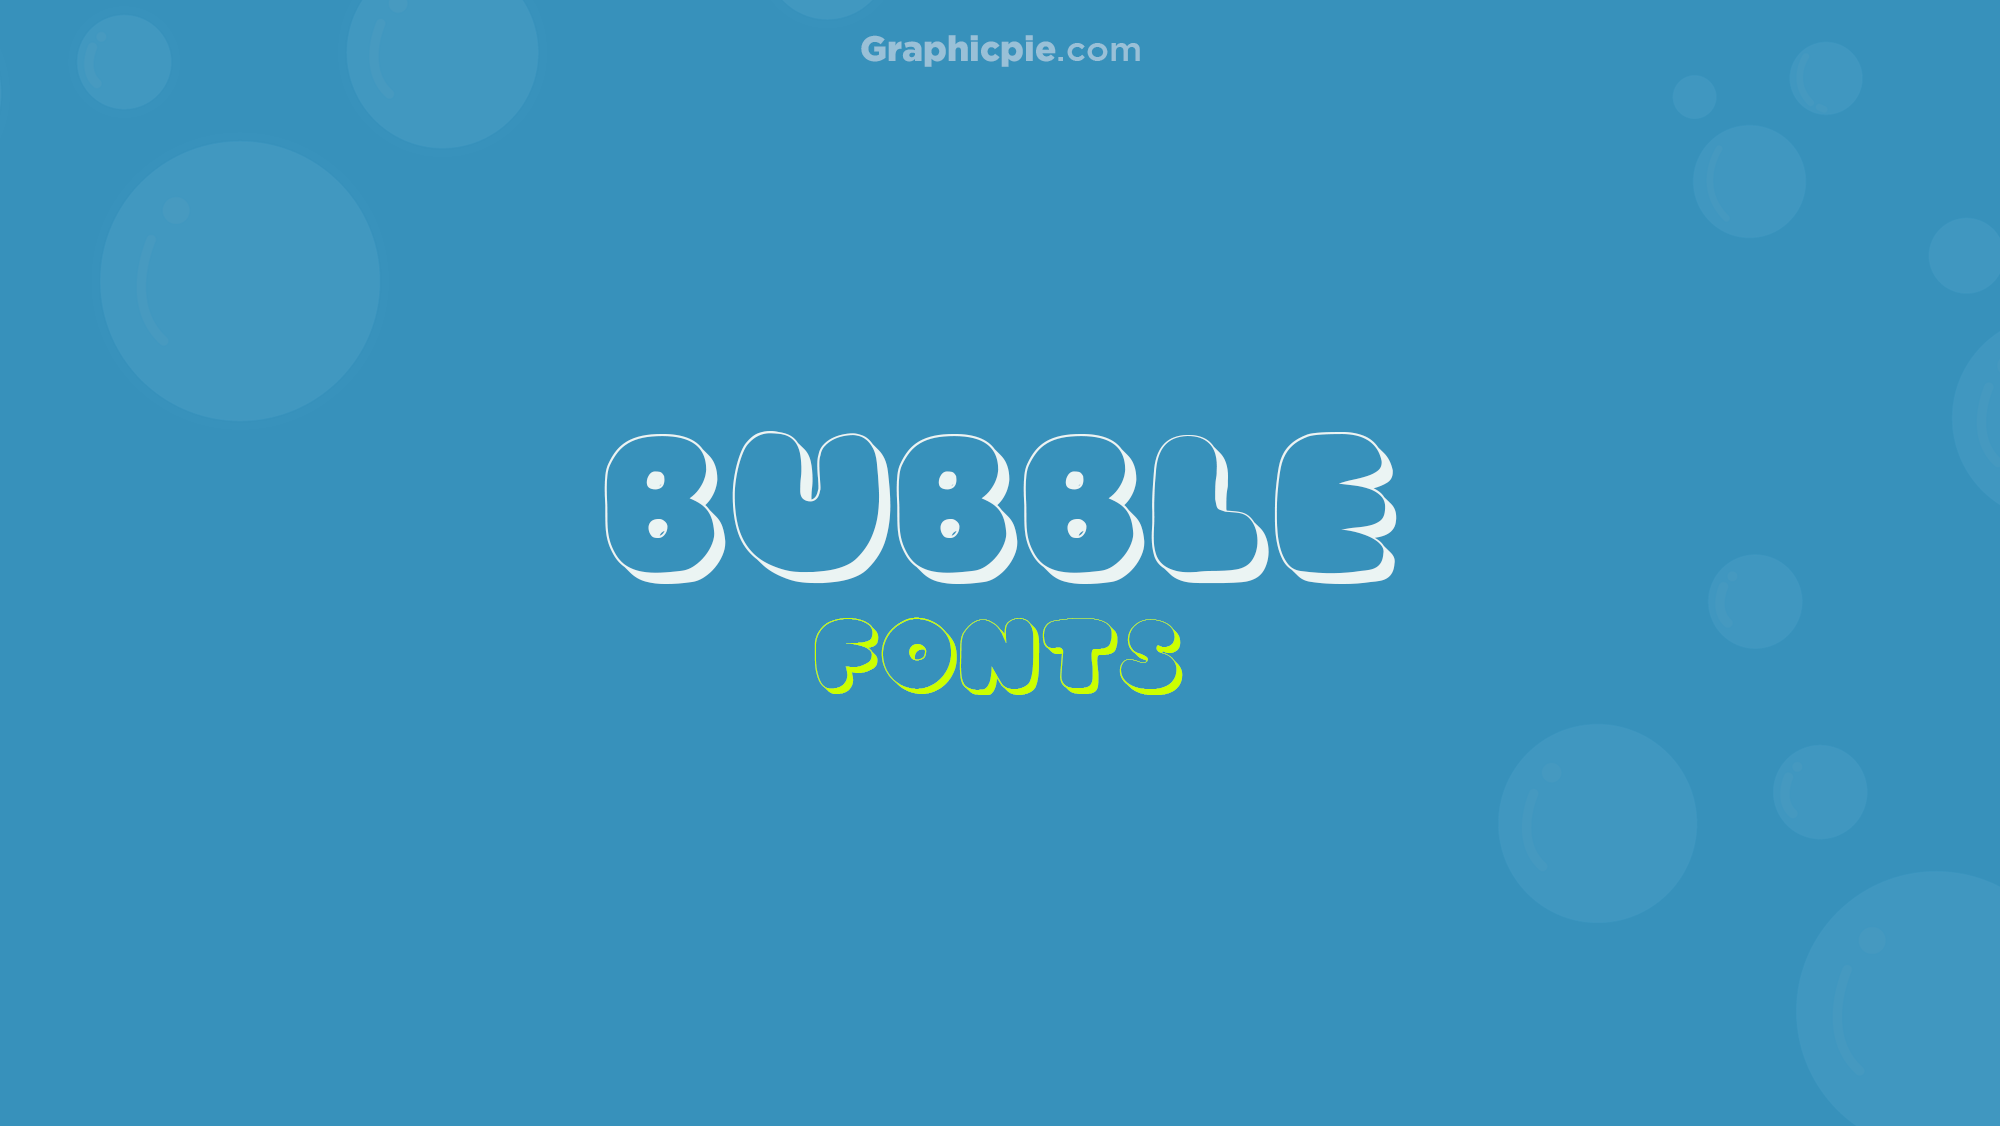 bubble letters font in word